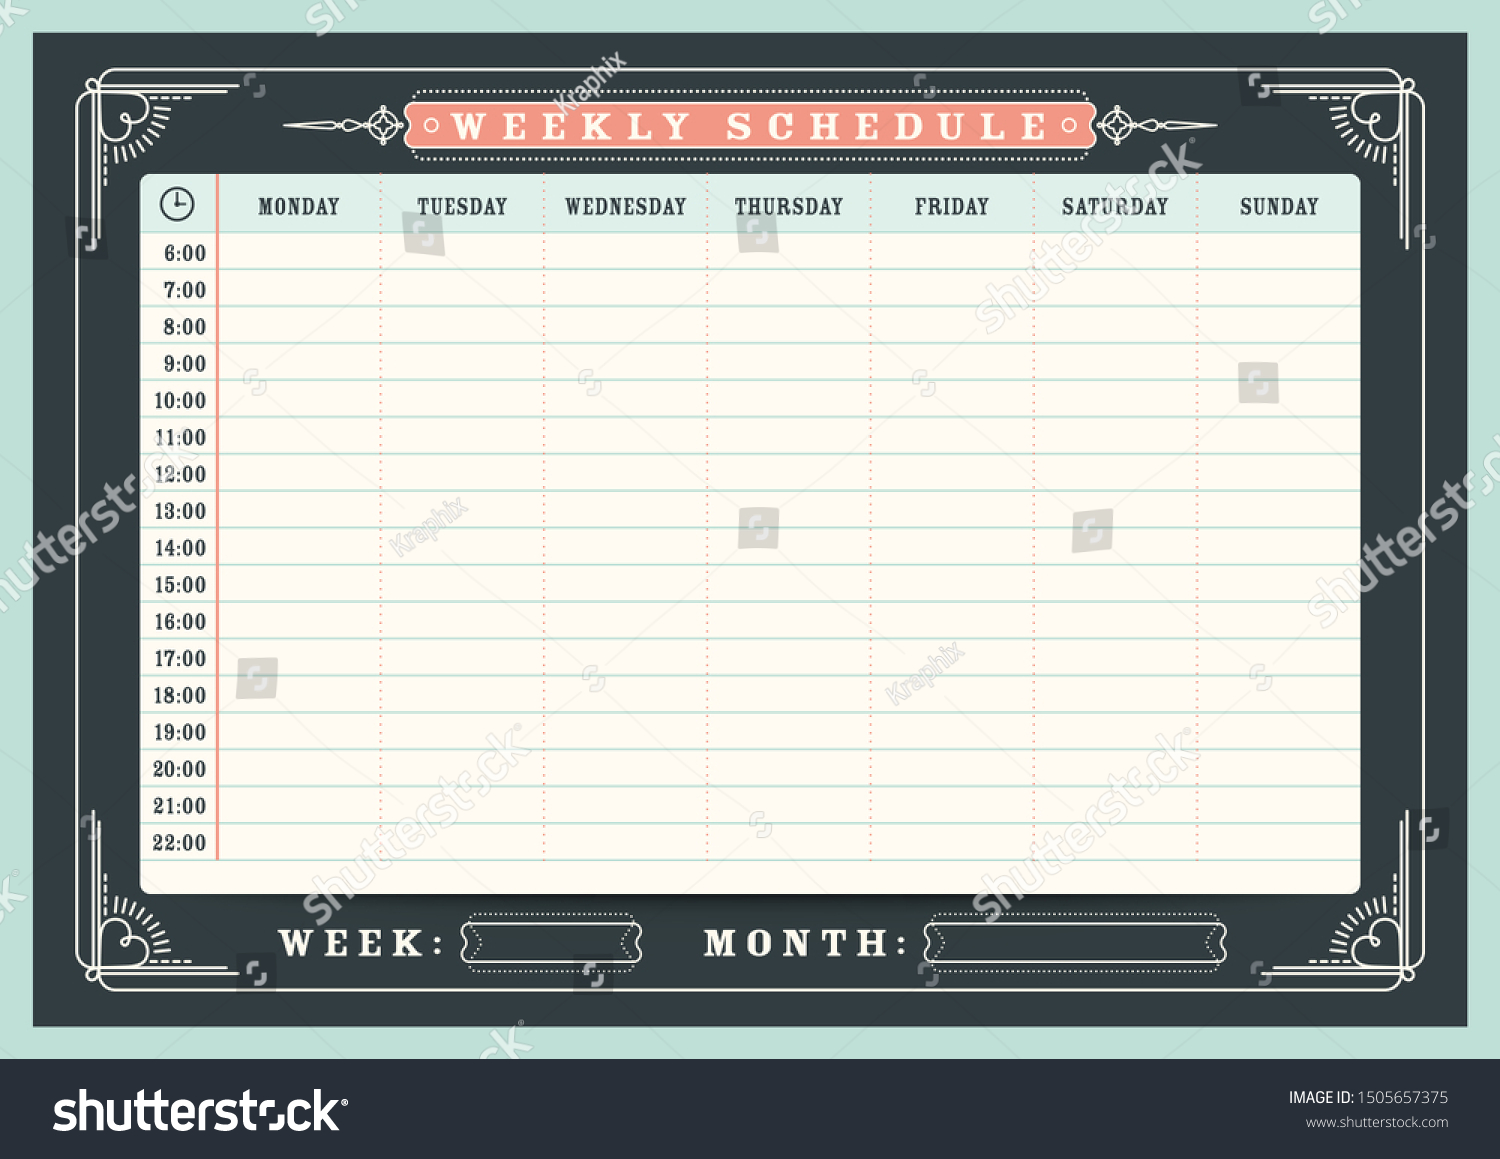 Weekly Day Planner Template from image.shutterstock.com